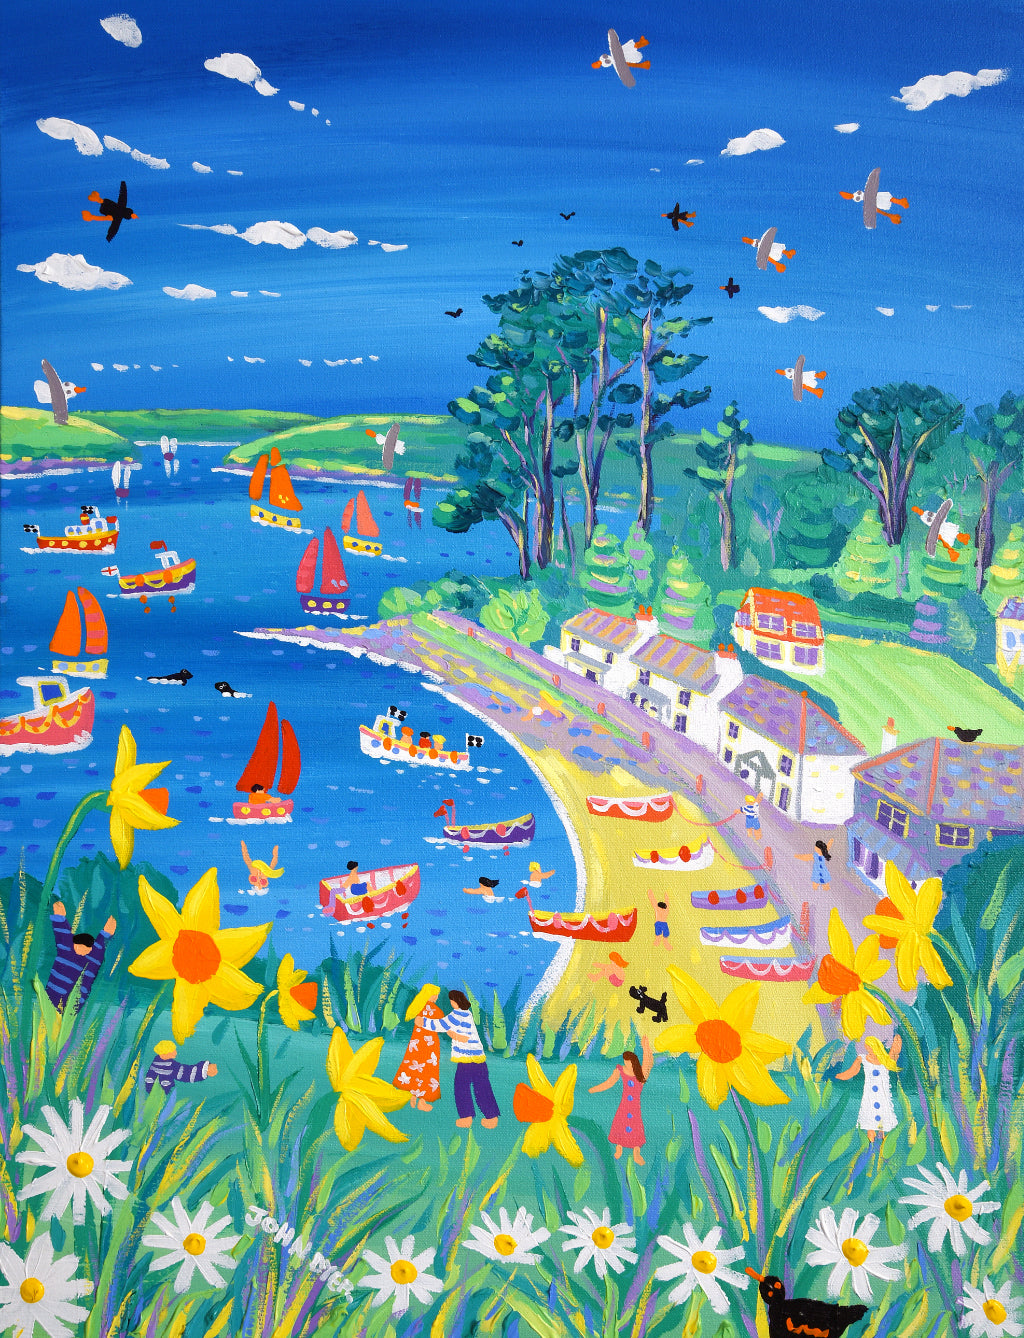 Painting by John Dyer of daffodils at Helford Passage in Cornwall.